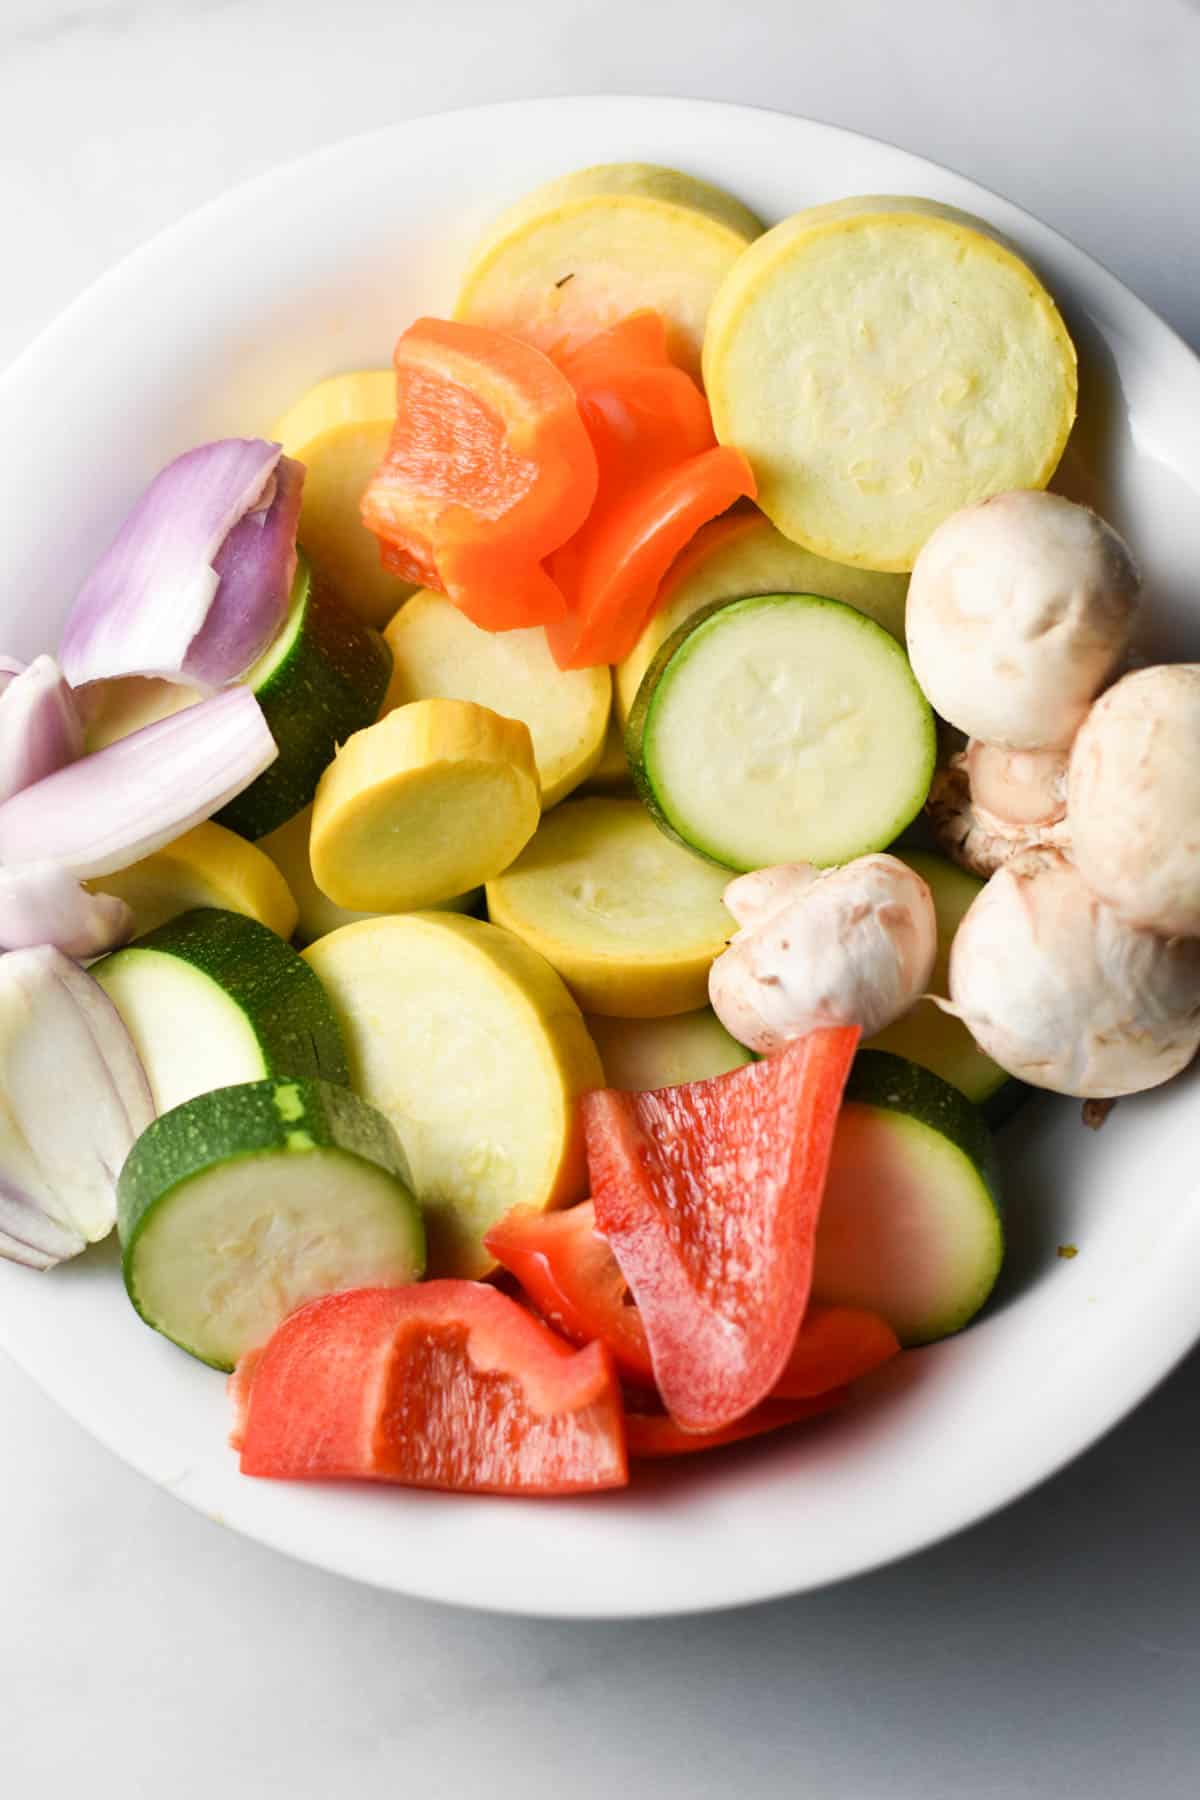 Assorted vegetables in a white bowl.